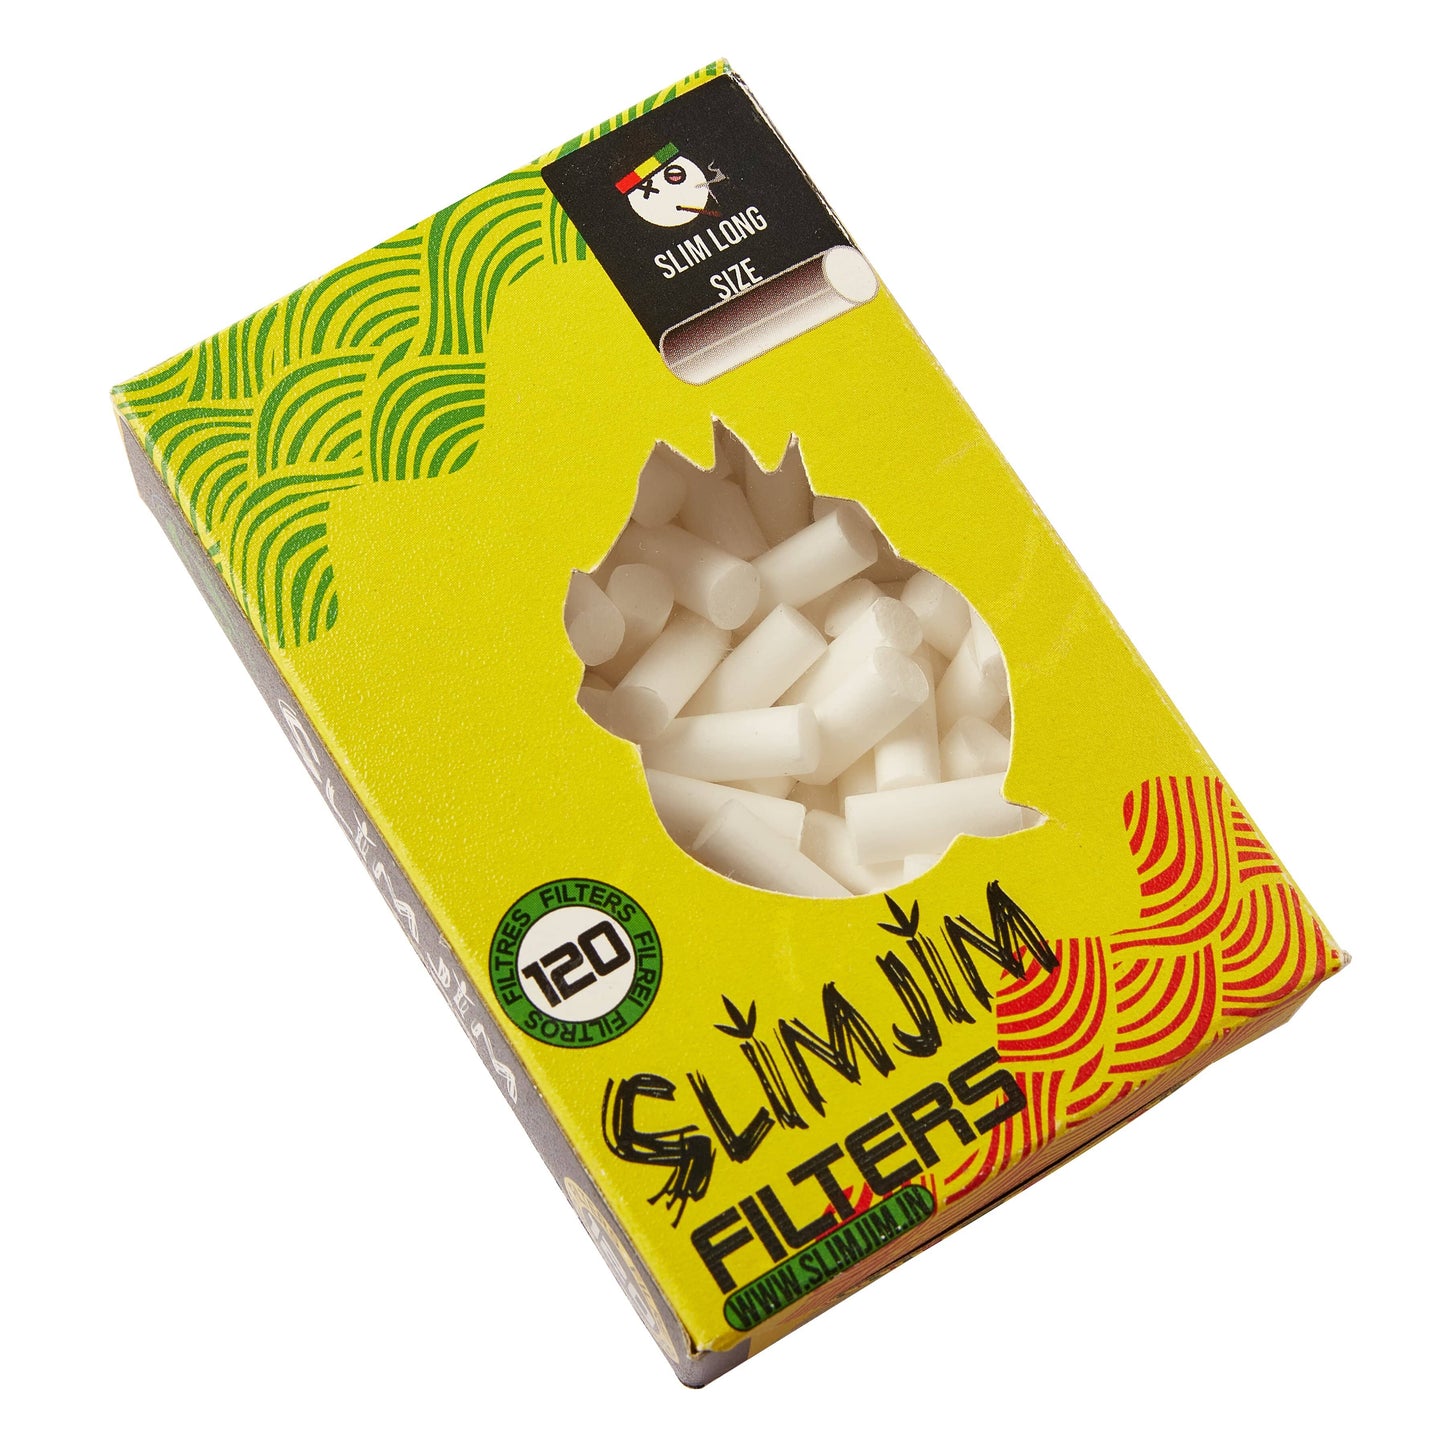 Slimjim Filters Slim Long Size (22 X 6 MM) (Box of 5)